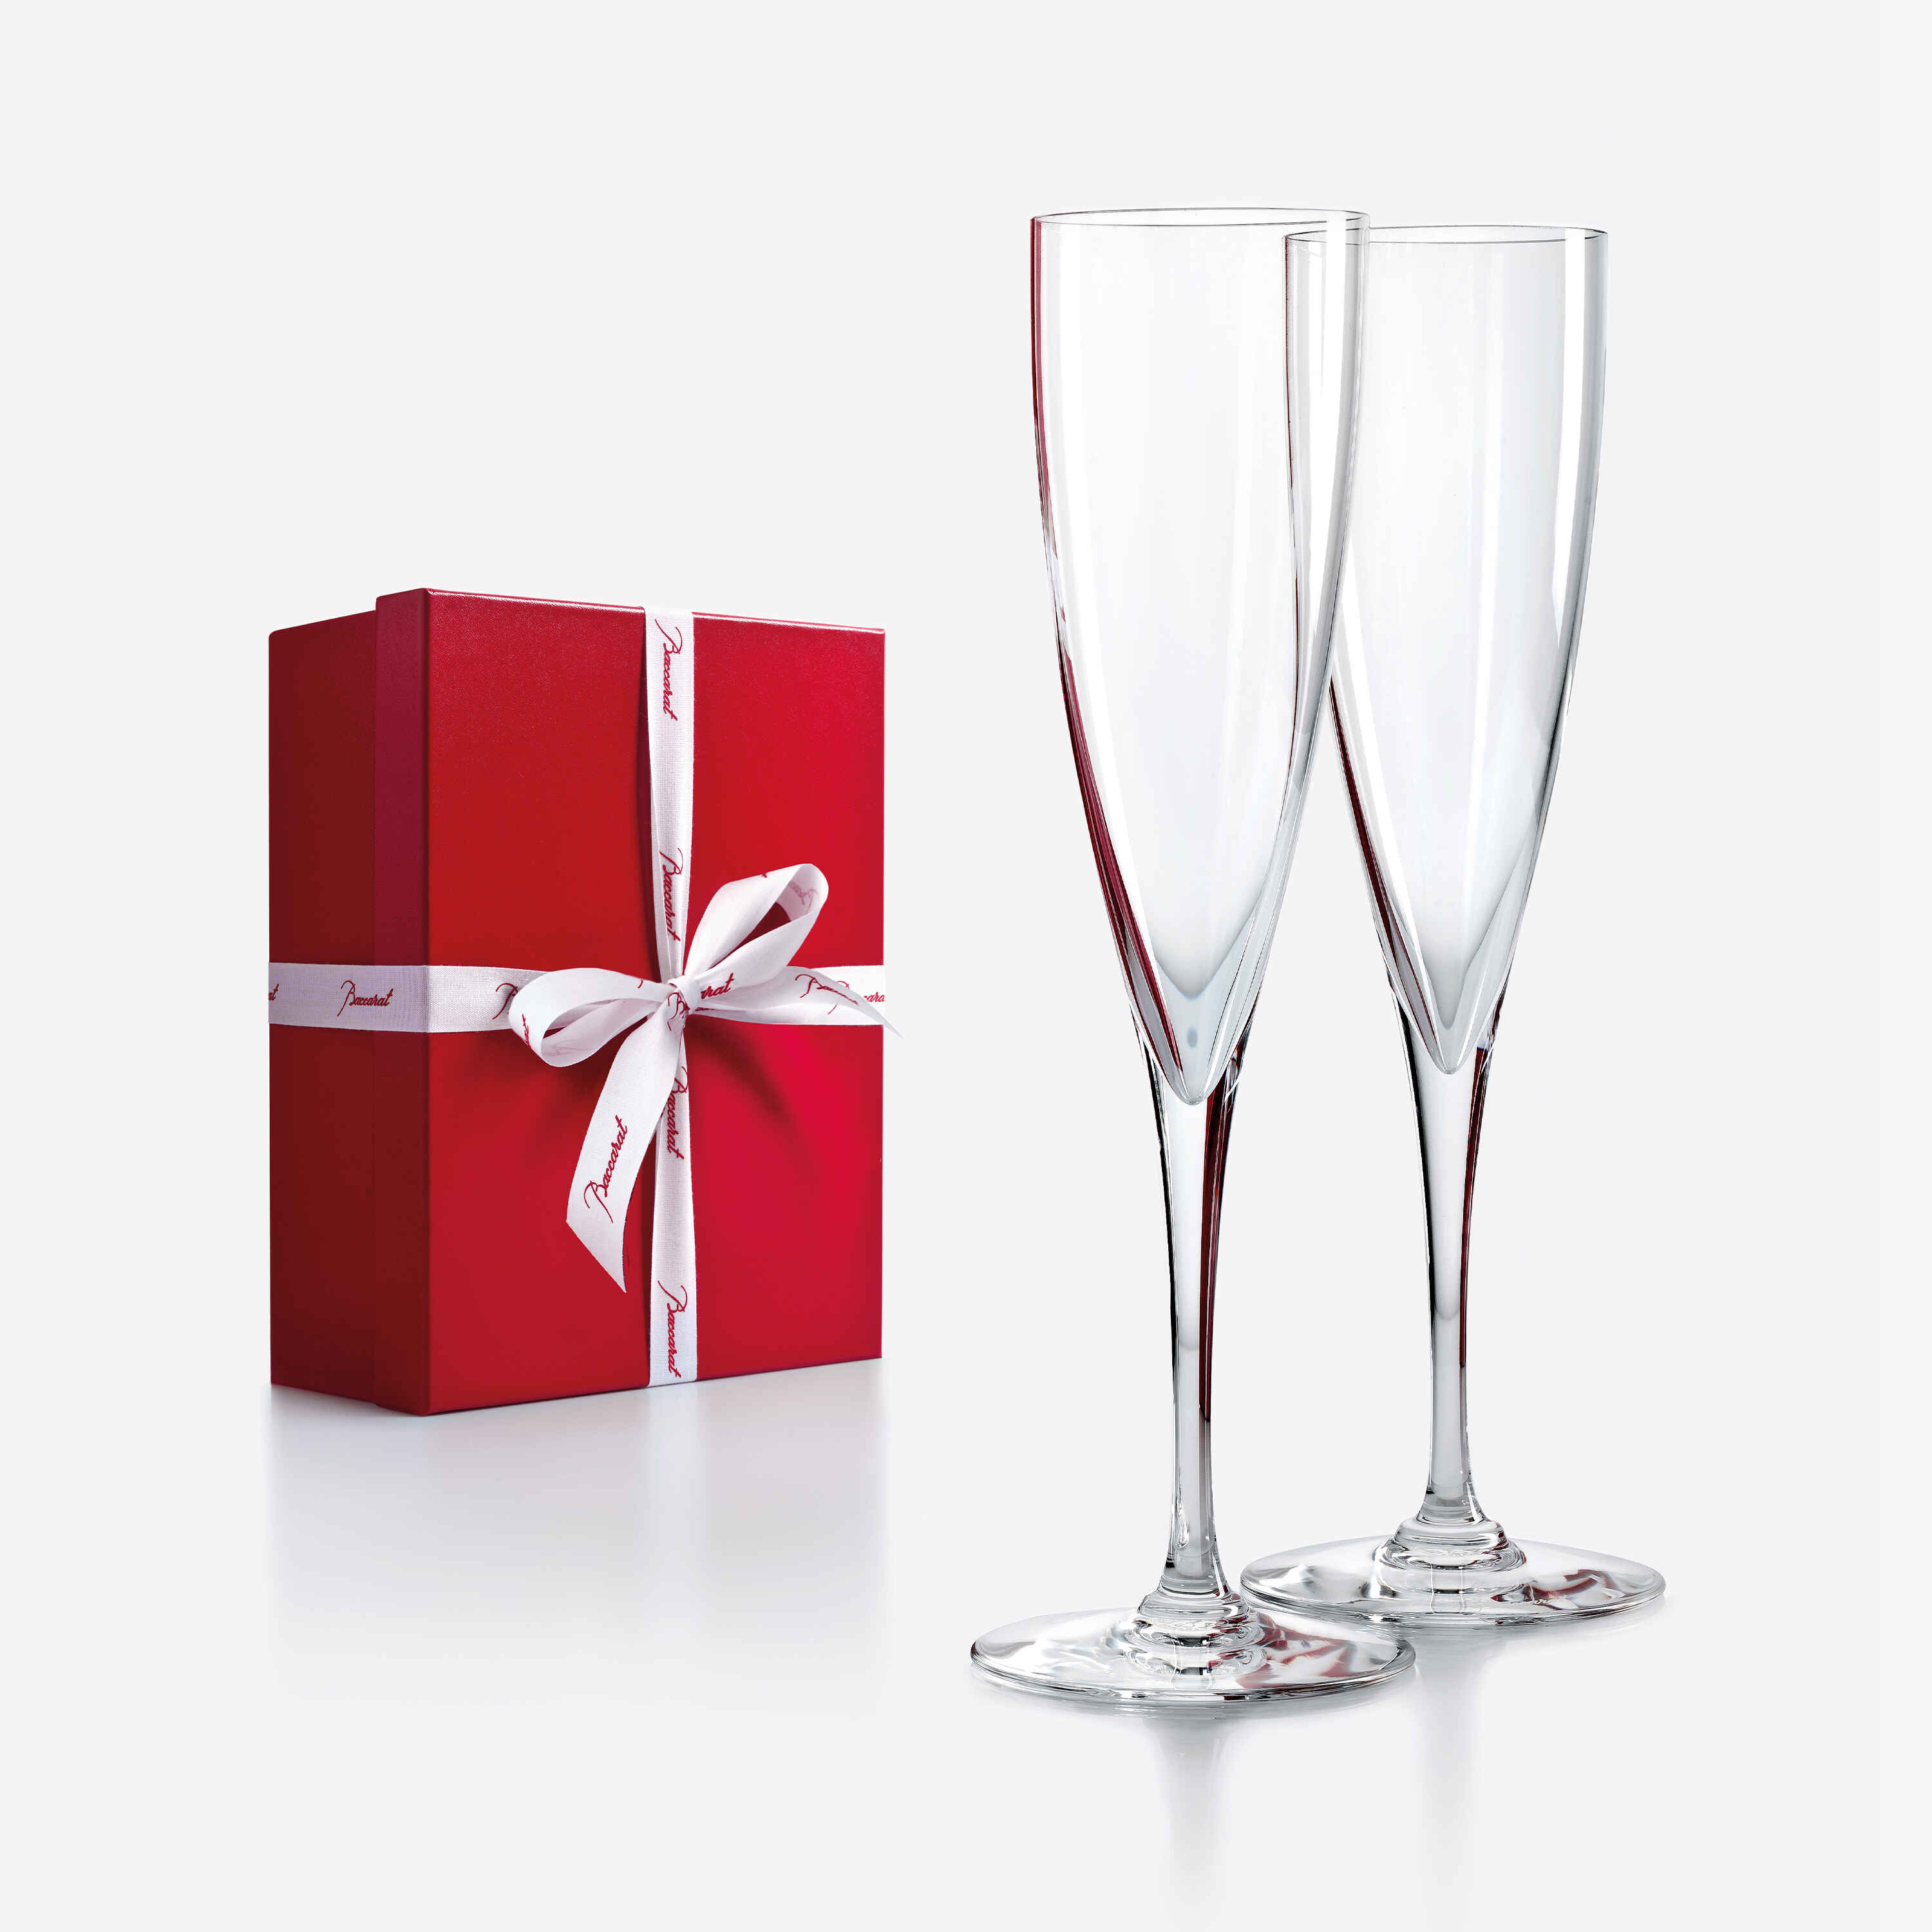 Buy or Send a pair of Engraved Champagne Flute Glasses Online!